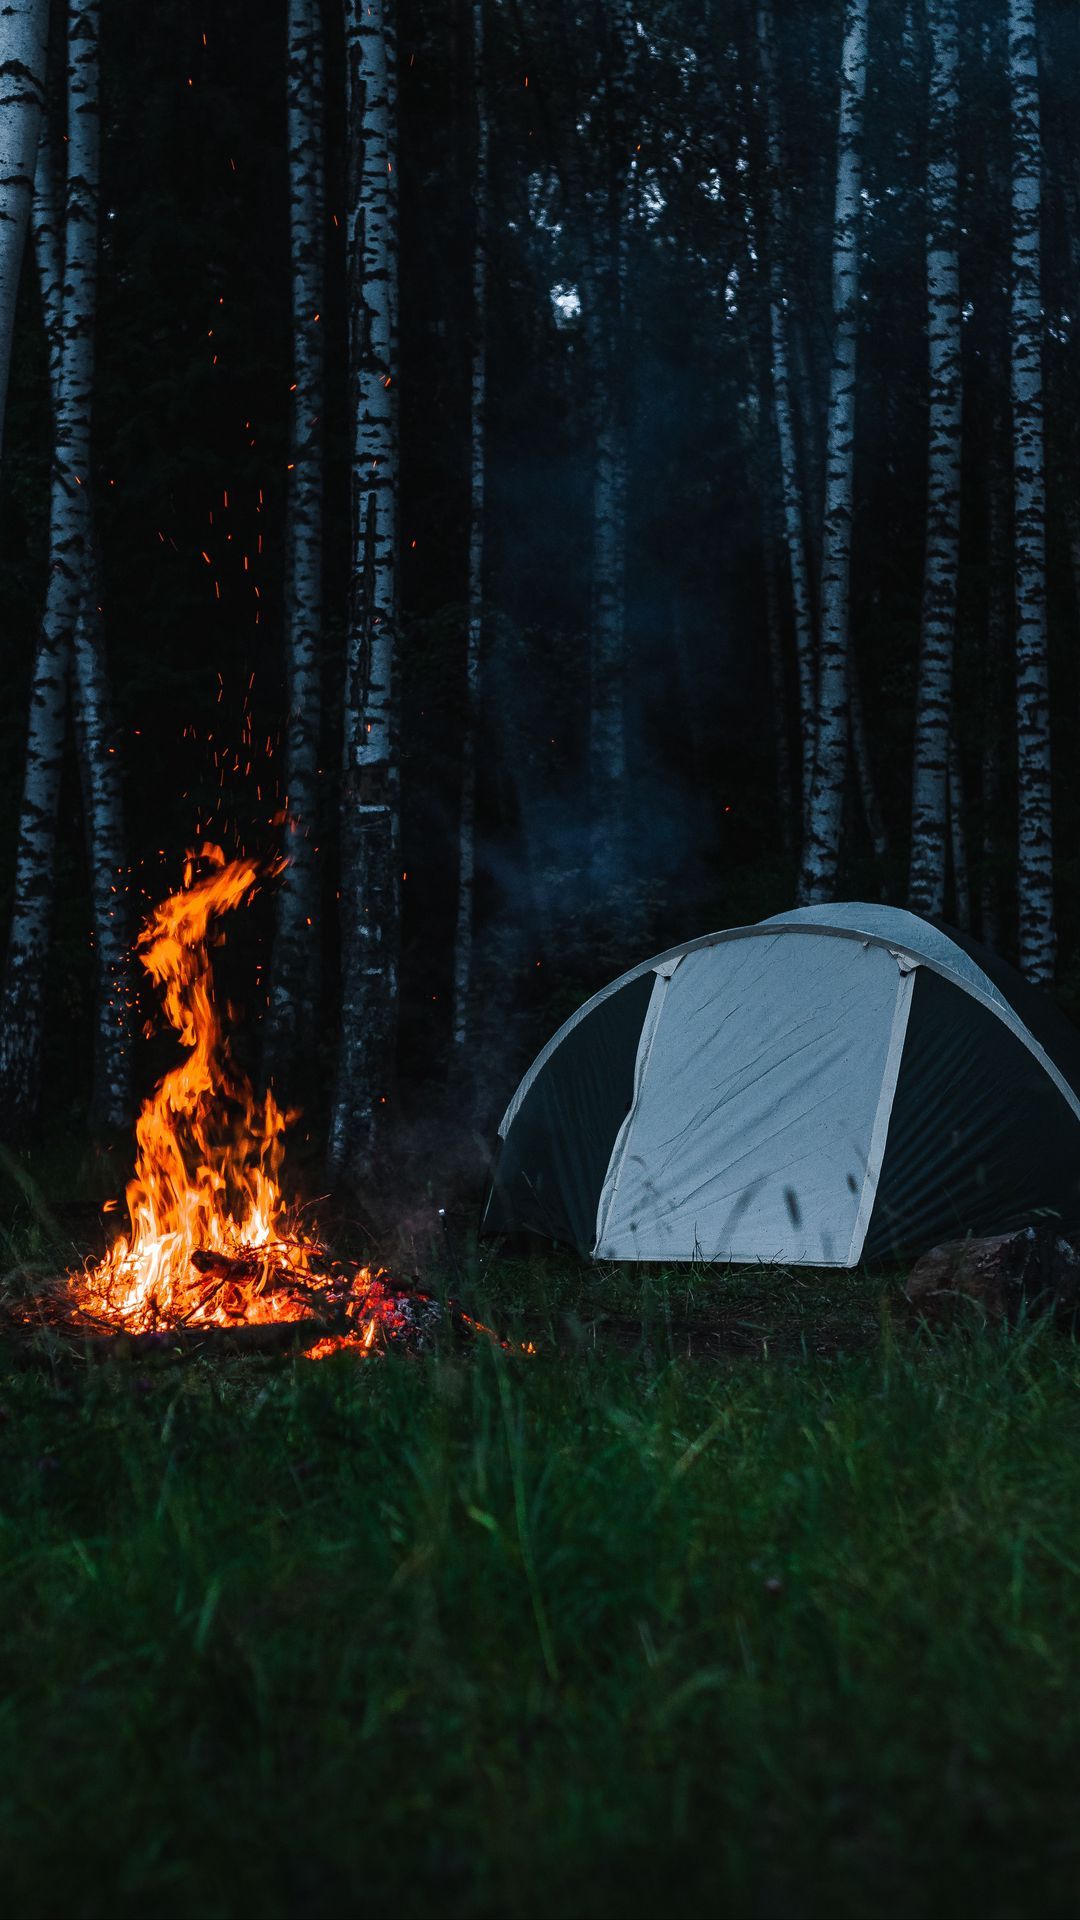 A tent and fire in the woods - Camping